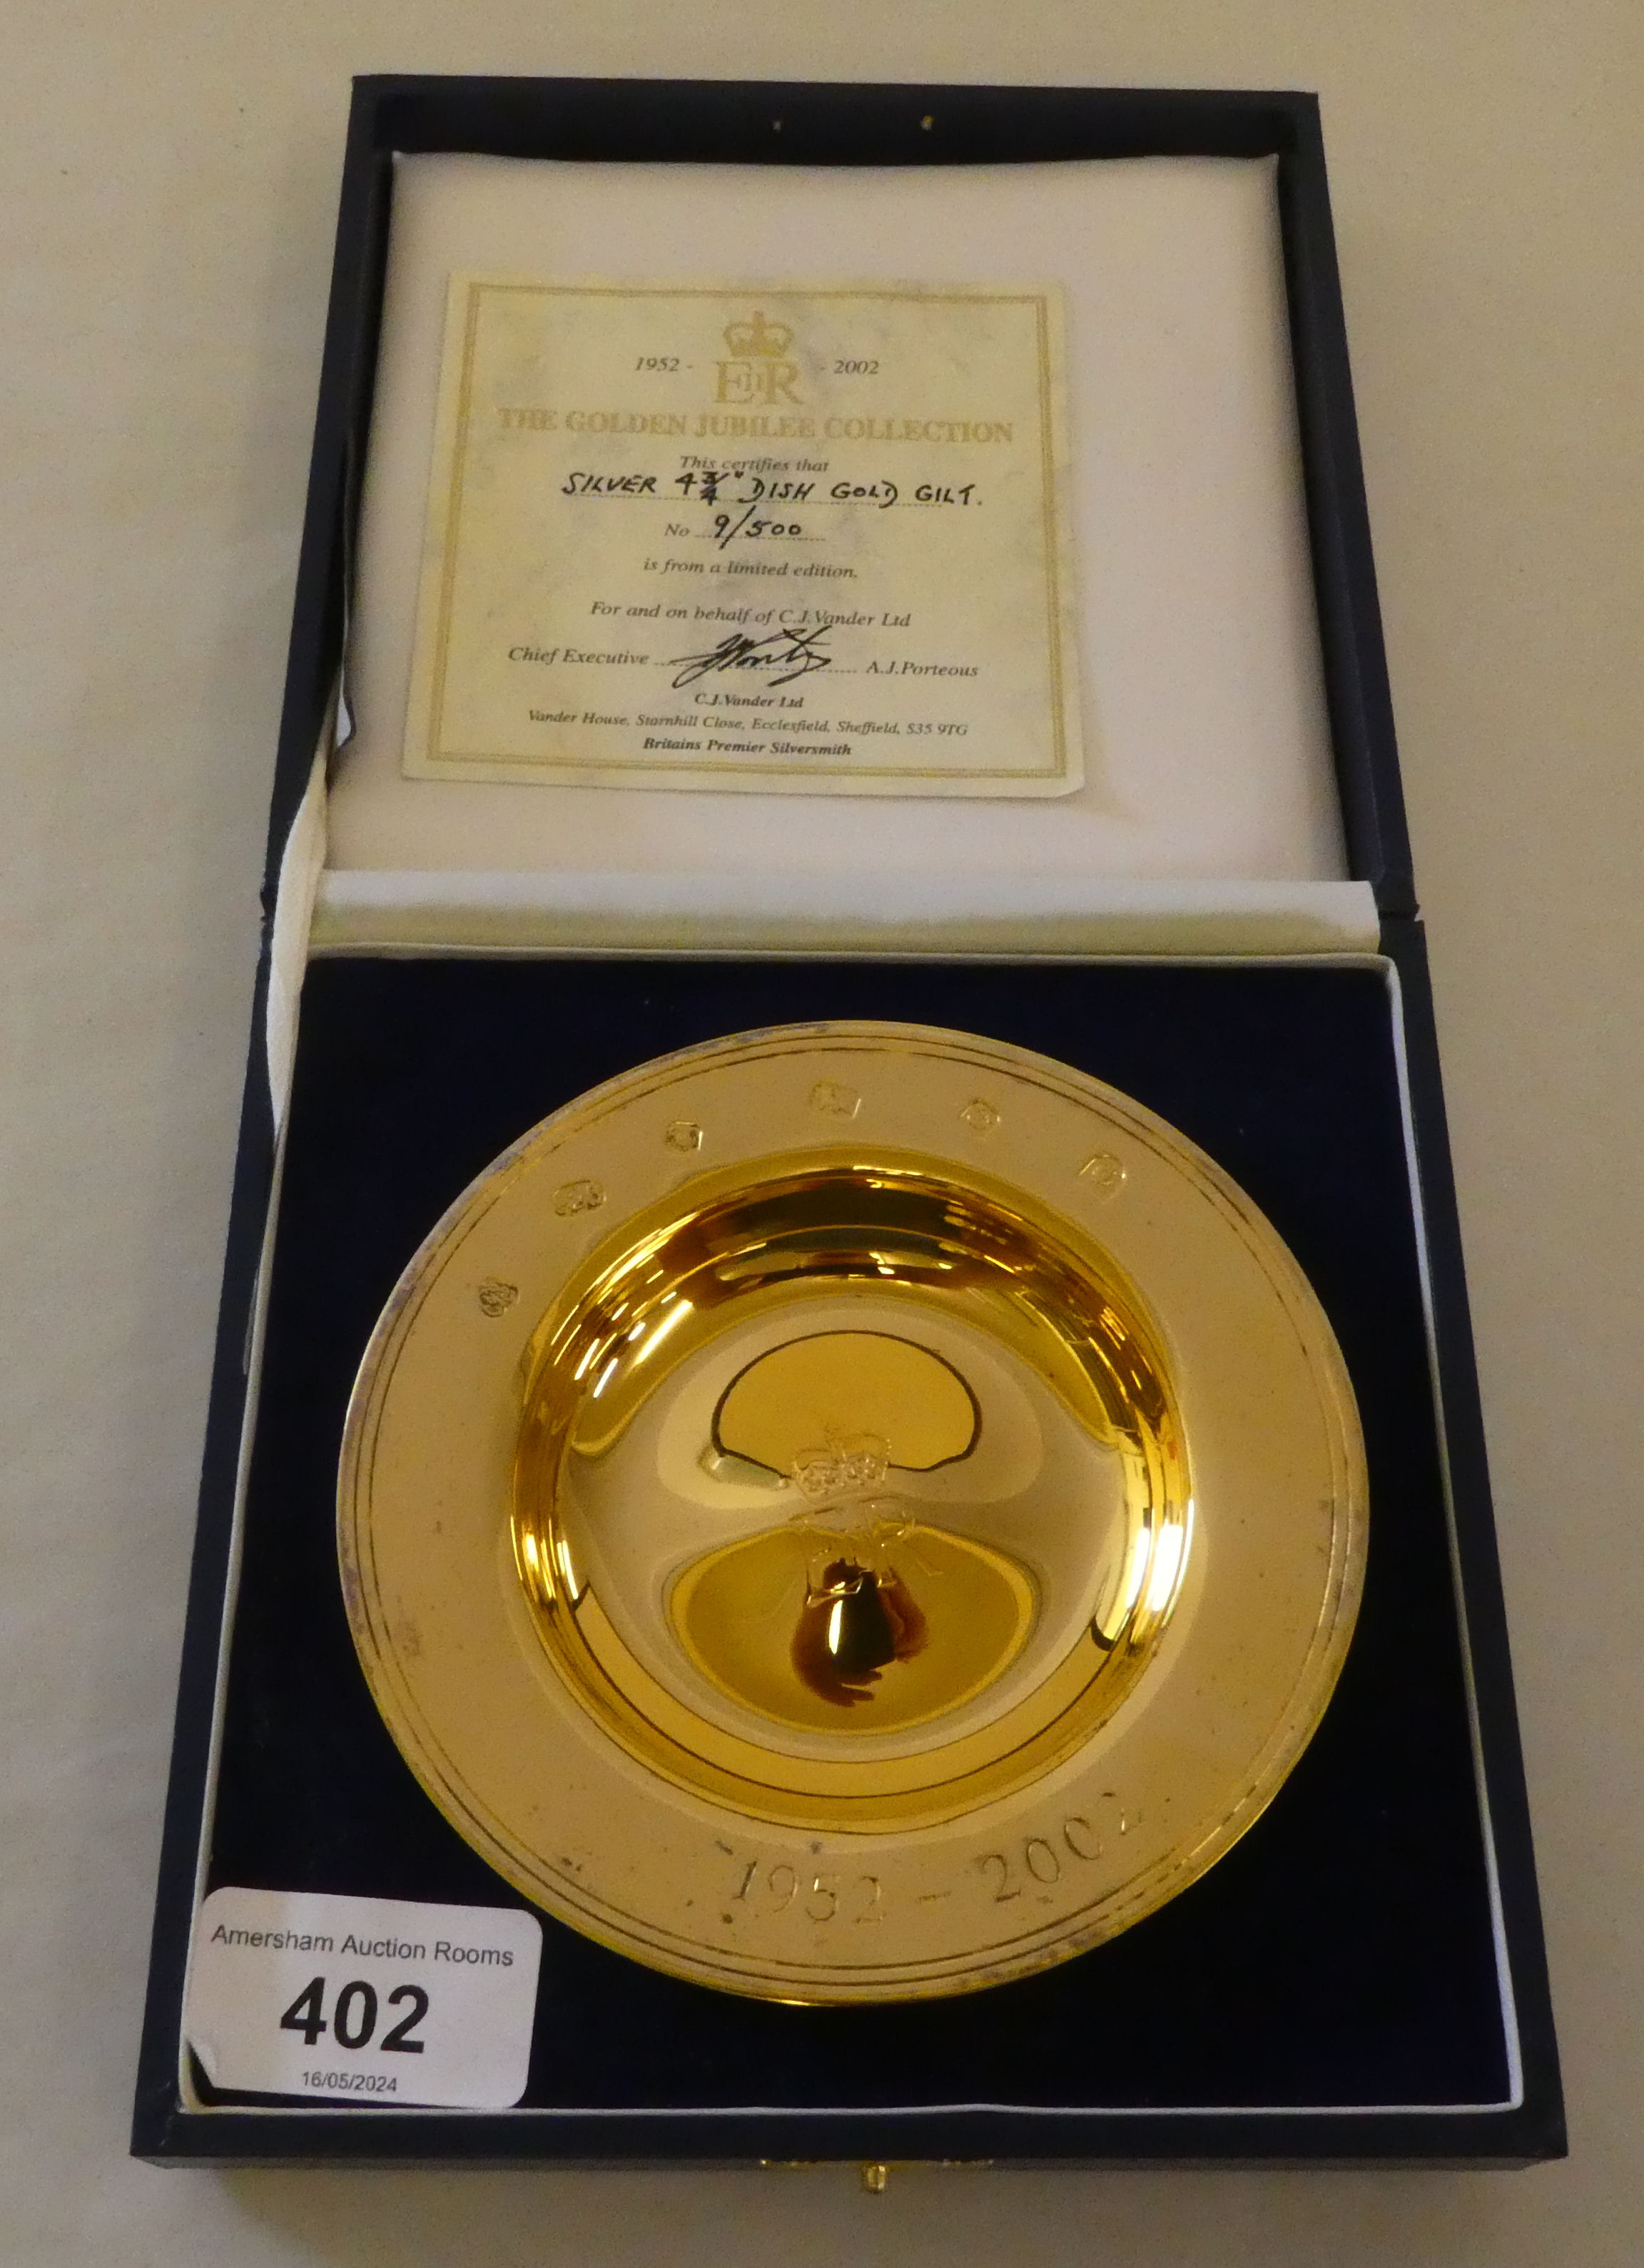 A Golden Jubilee Armada style silver gilt dish  Limited Edition 9/500  Sheffield 2002  5"dia  boxed